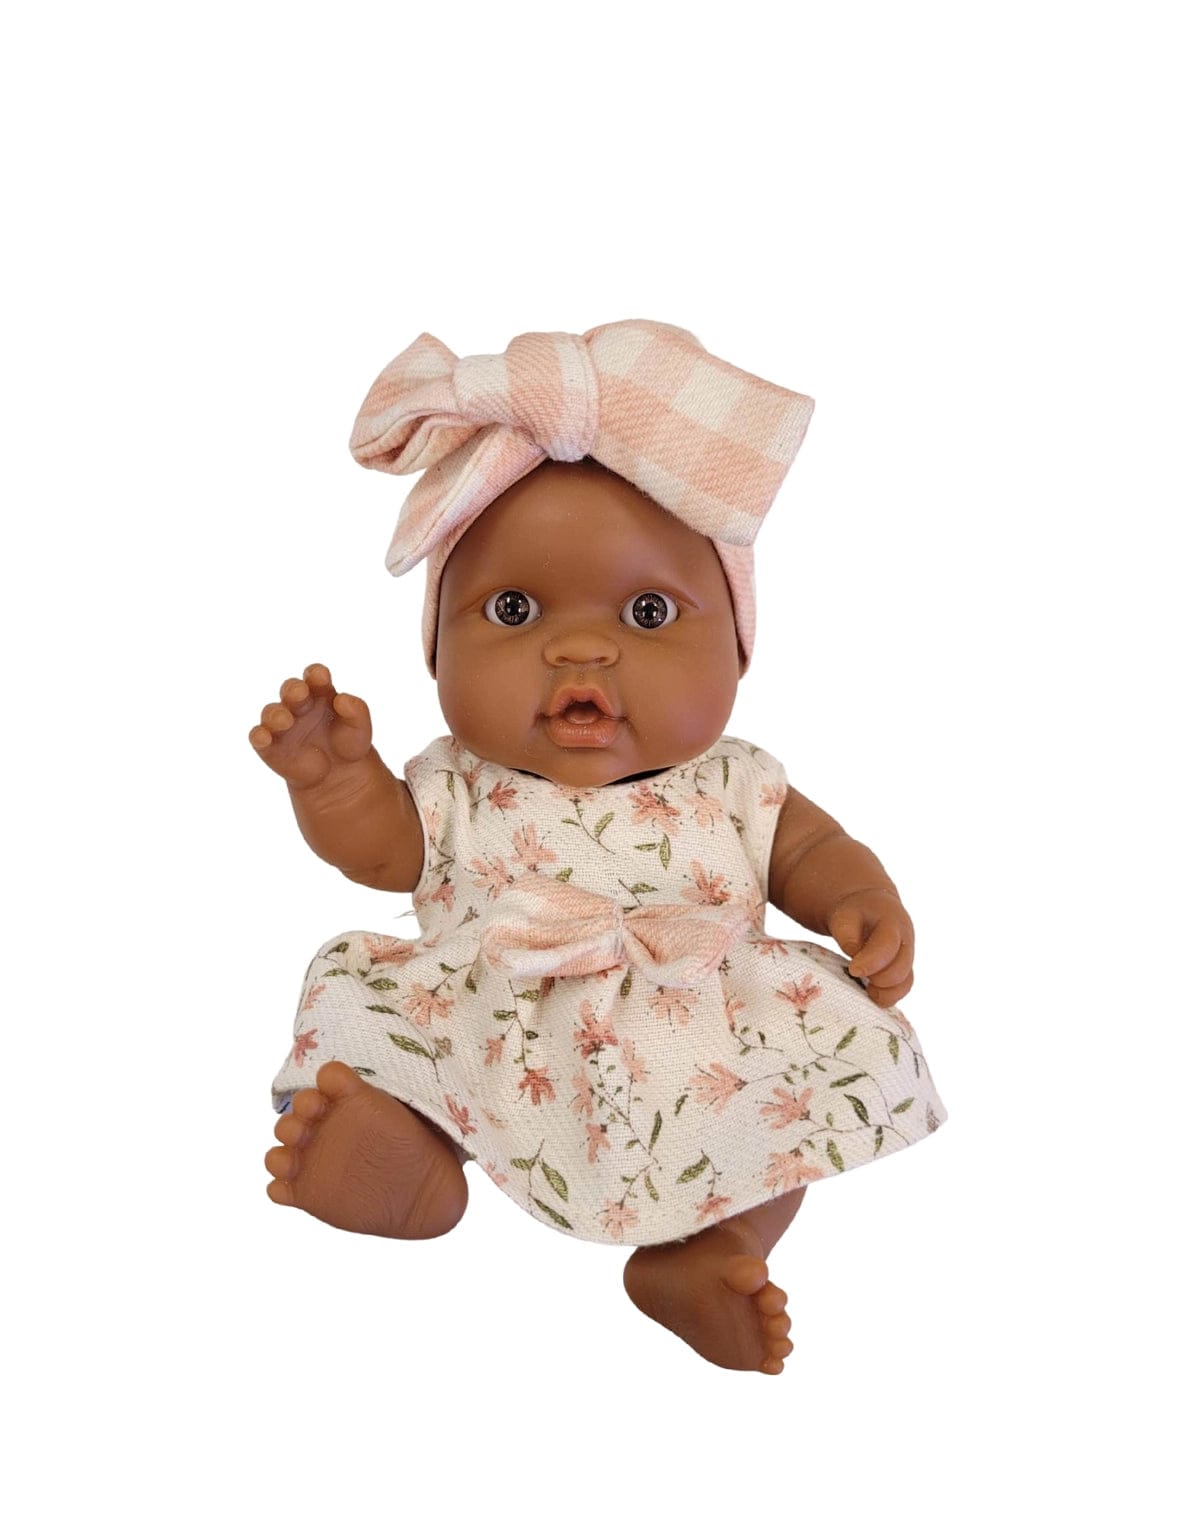 Hebe with Flowery Dress & Pink Buckwheat Headband - Peques Doll Paola Reina Dolls Lil Tulips